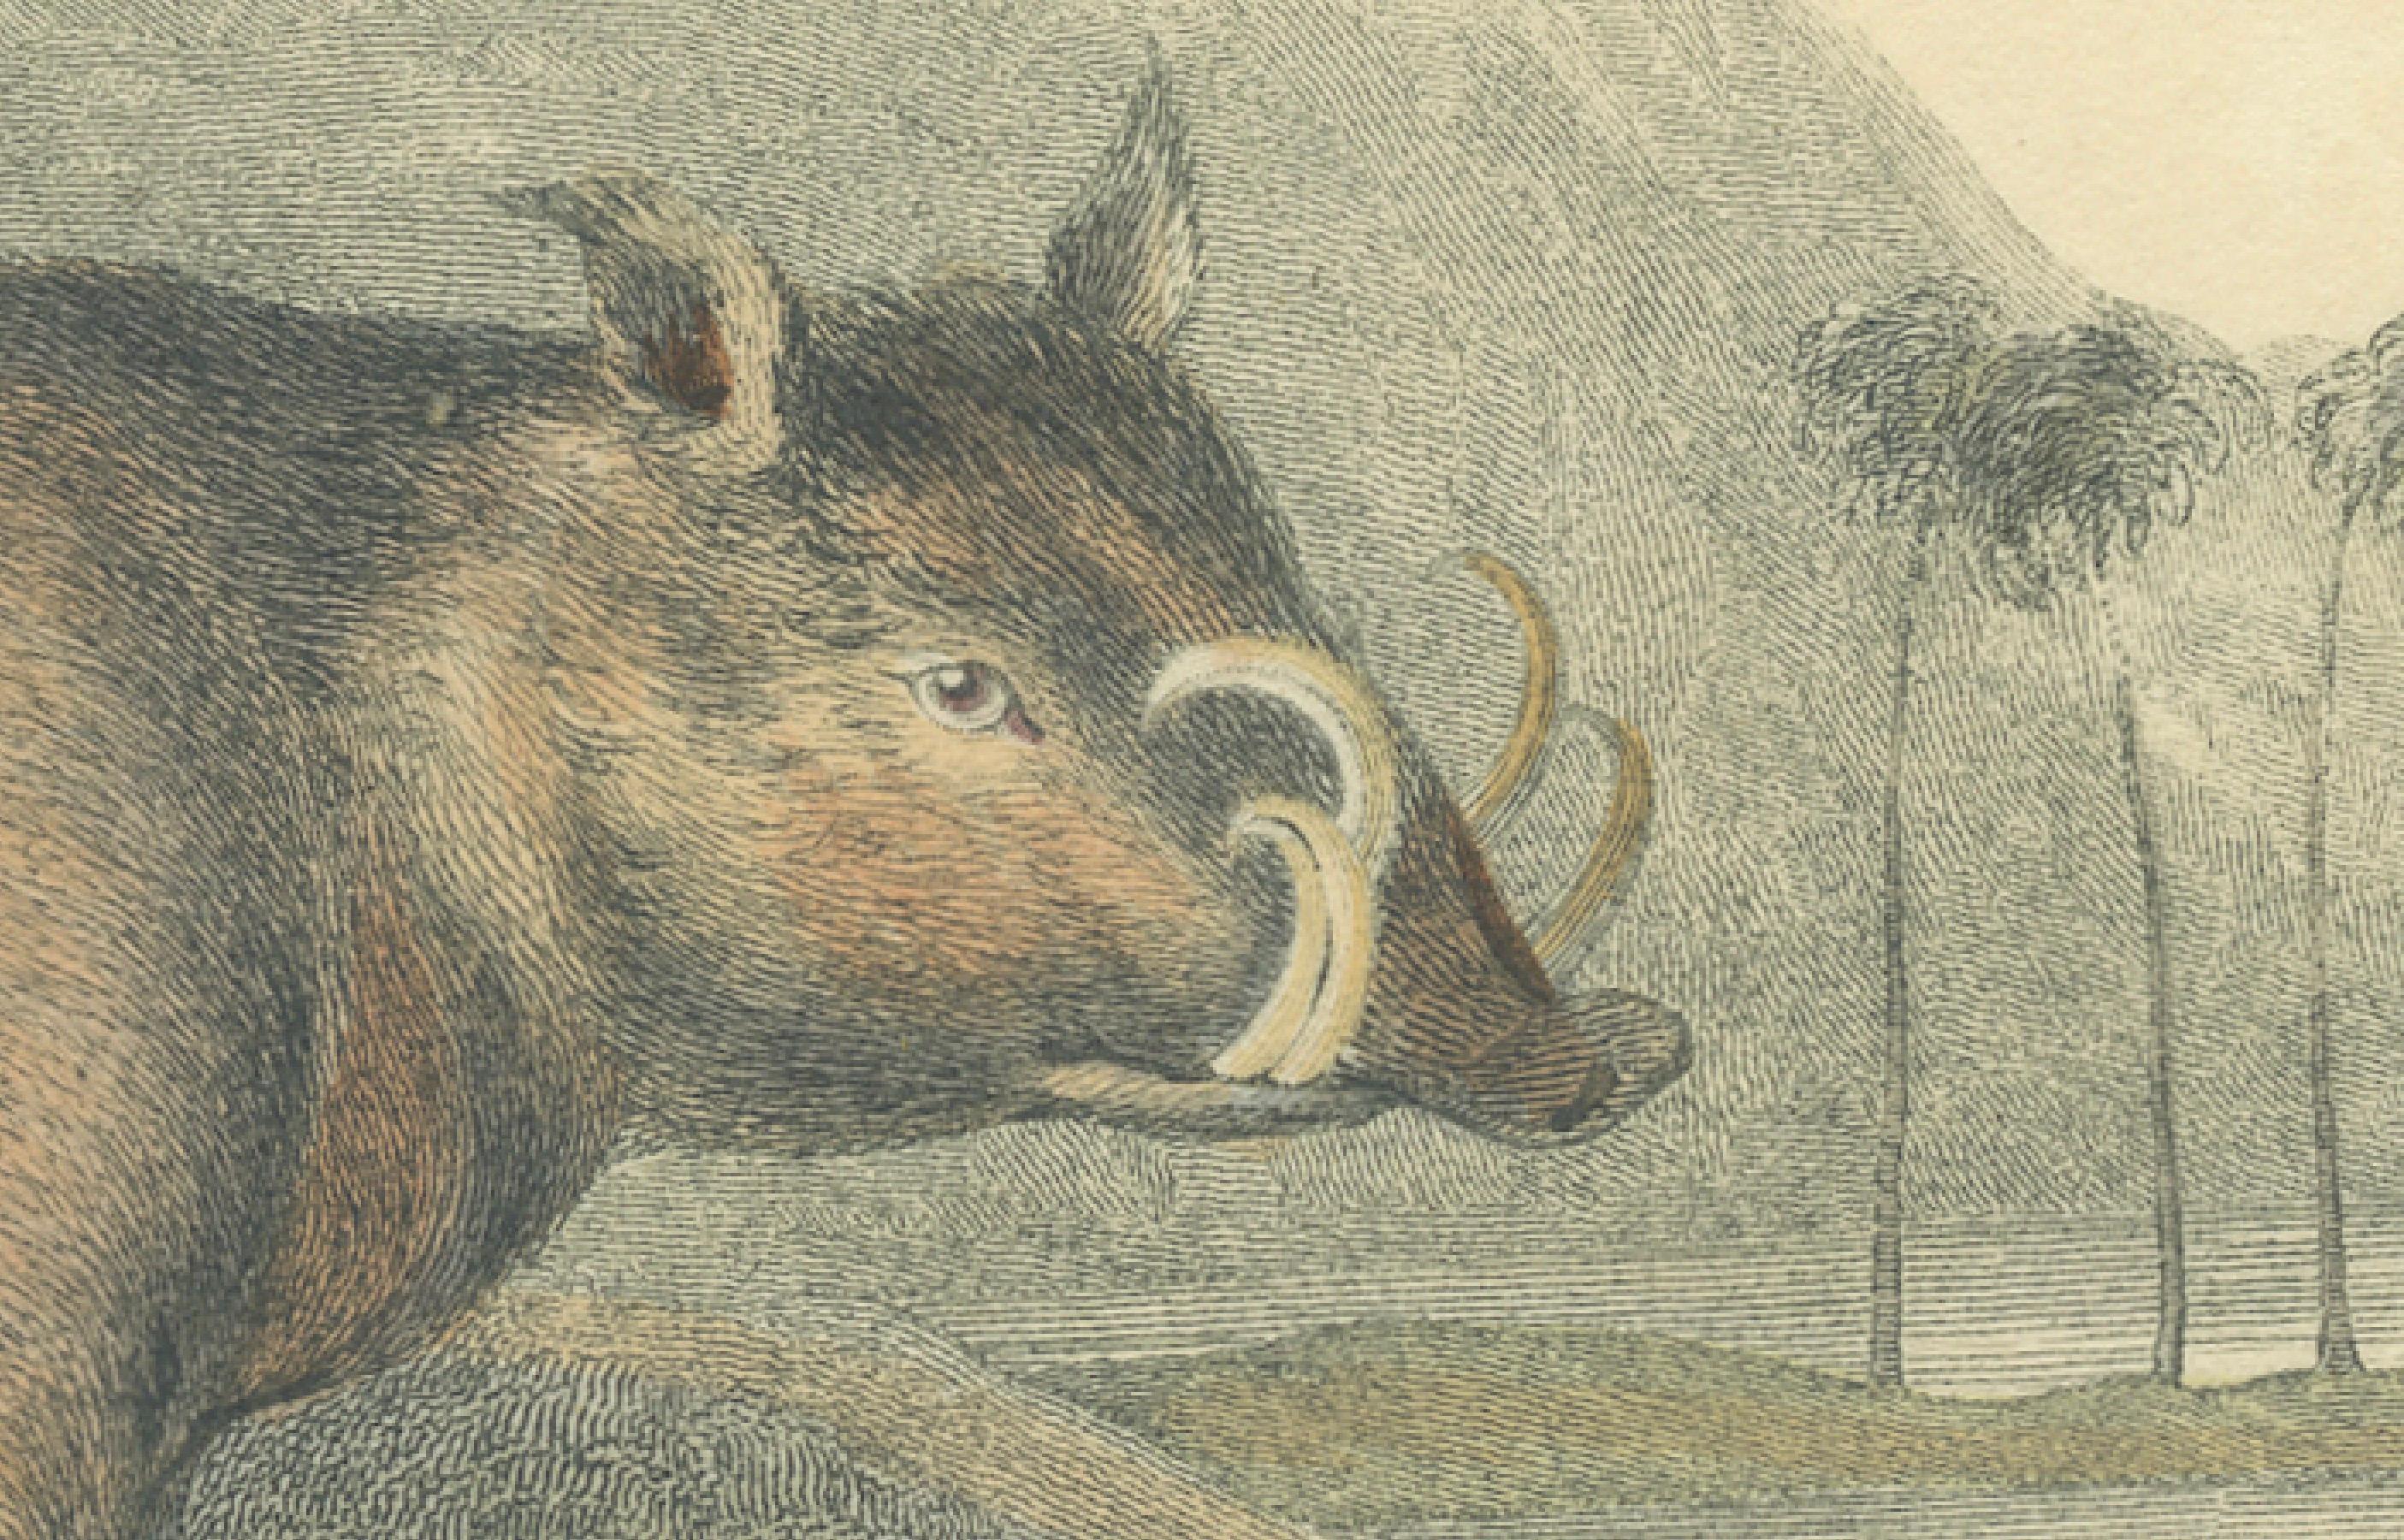 Antique print of a babirusa, titled 'The Babiroussa, Sus Babirussa'.  This print was published by G.B. Whittaker, and the illustration was created by Charles Hamilton Smith, approximately around the year 1826. The babirusa is an unusual member of